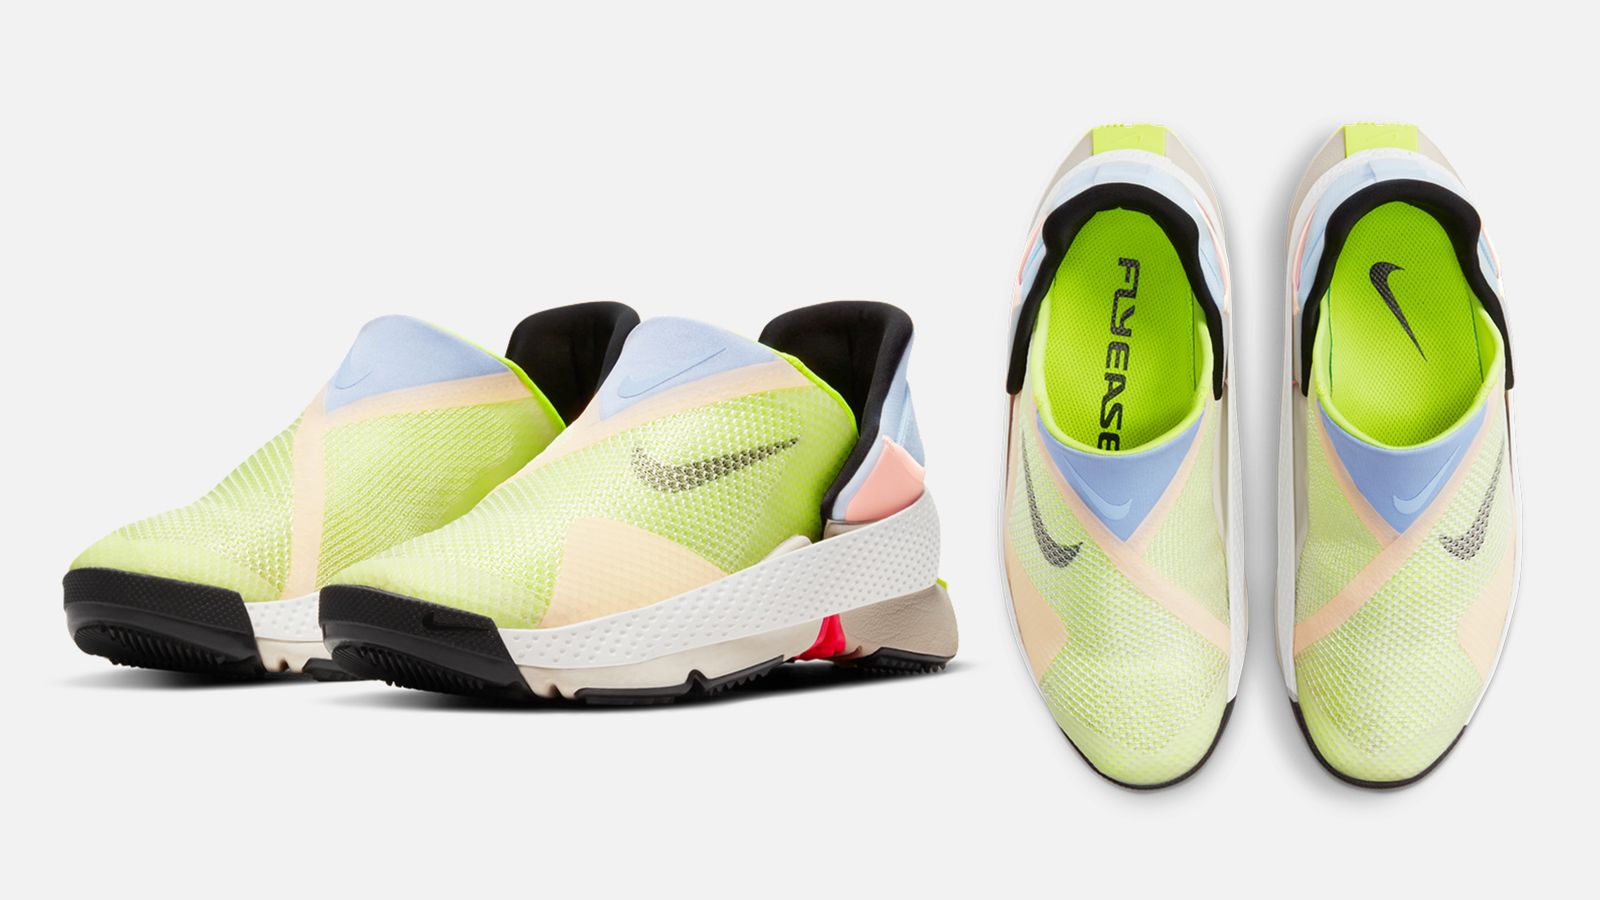 Go Flyease: Nike made hands-free shoe and you have to see it to believe it | CNN Business